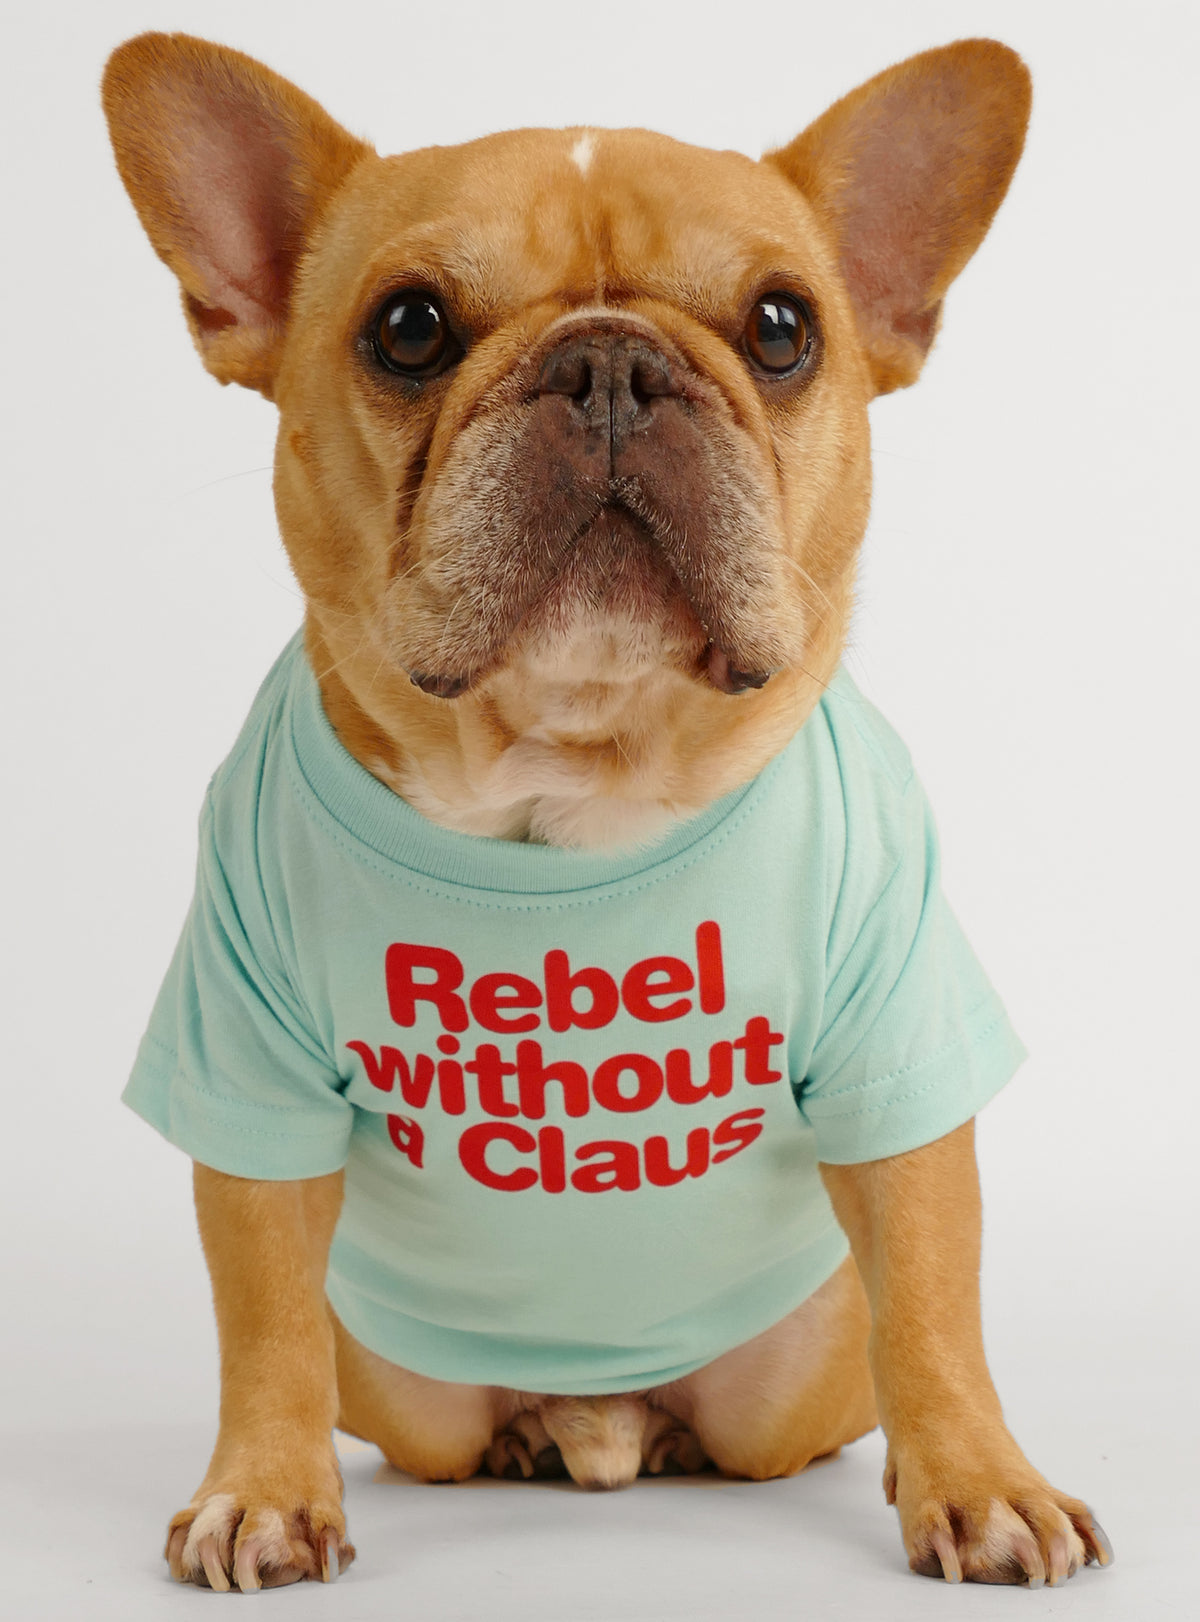 Rebel Without a Claus Dog Tee